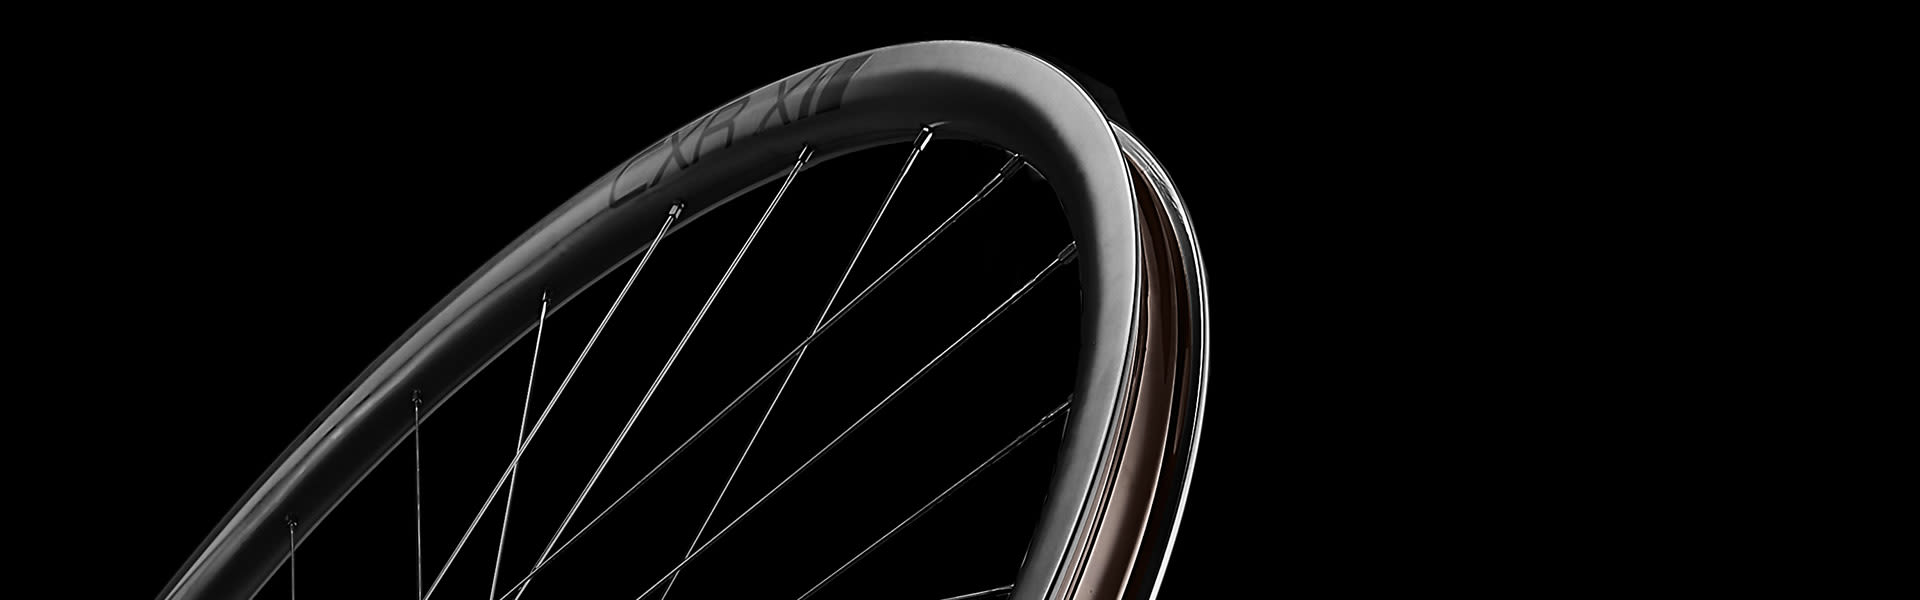 Tubeless Tire Compatibility